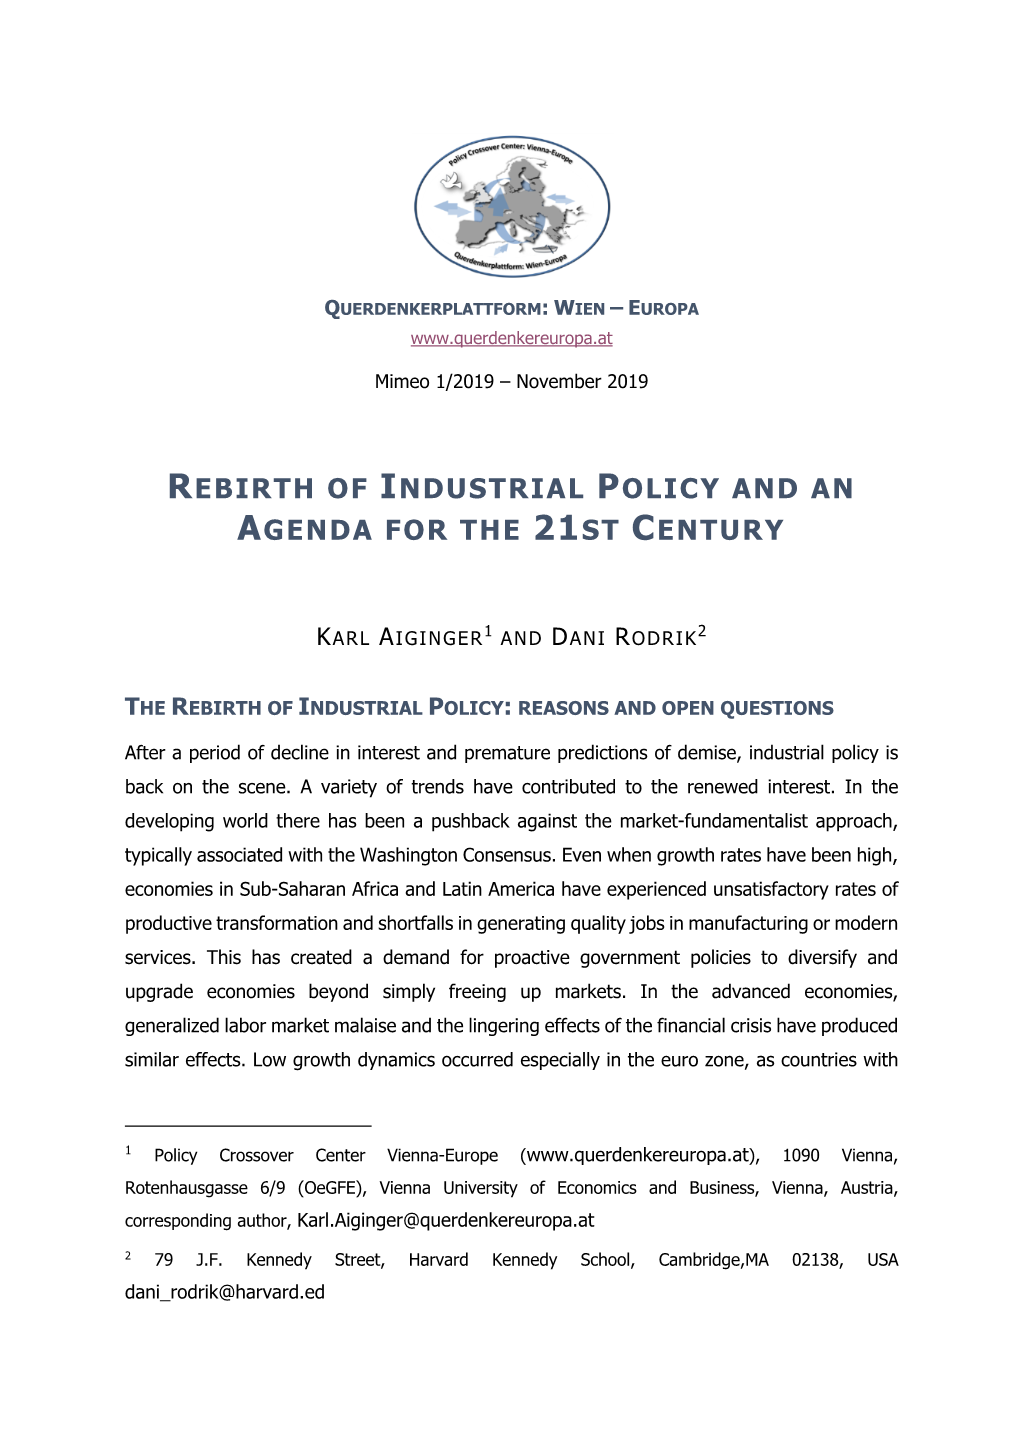 Rebirth of Industrial Policy and an Agenda for the 21St Century